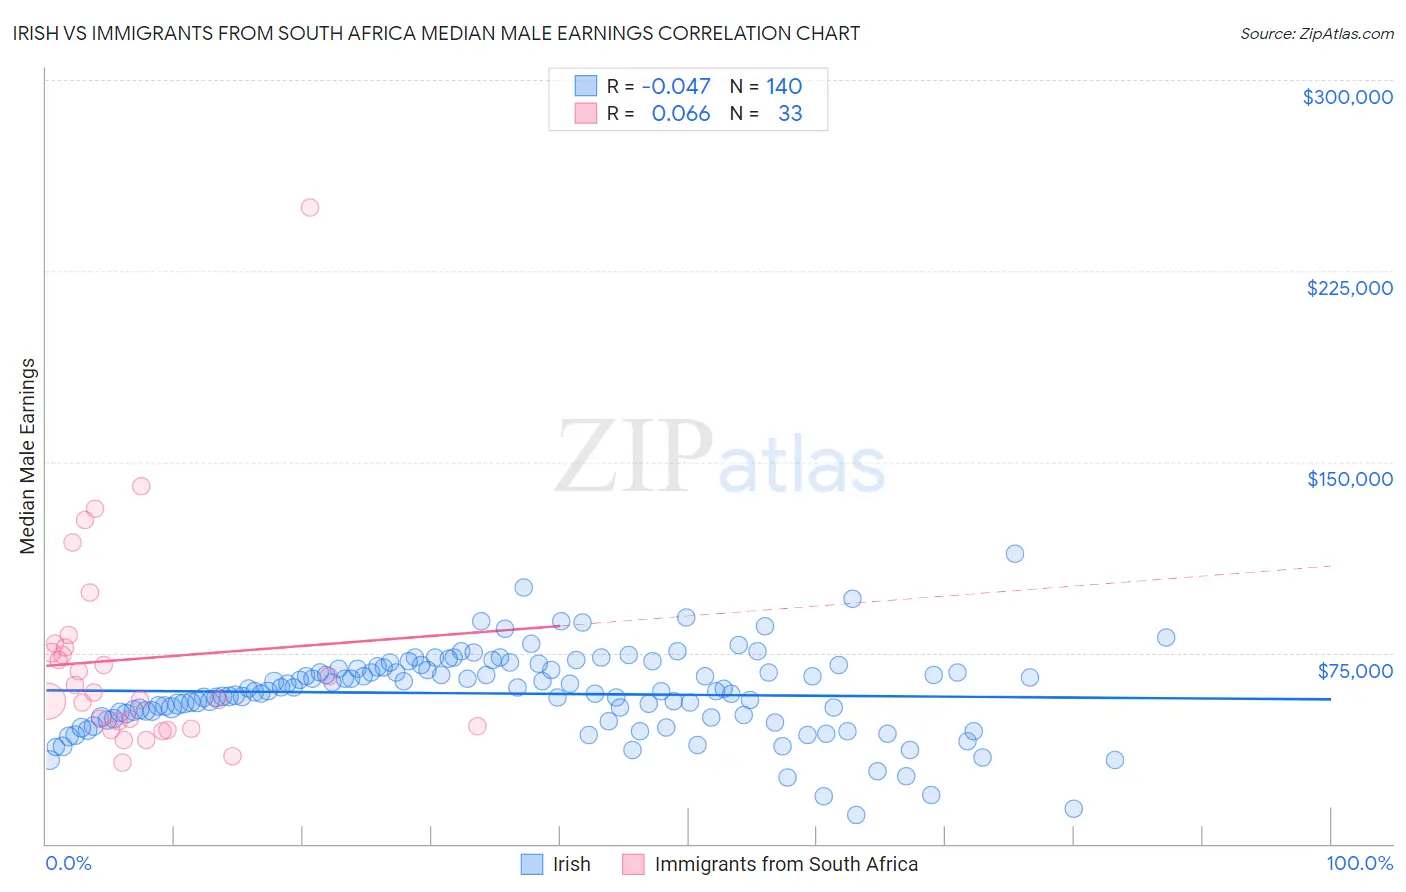 Irish vs Immigrants from South Africa Median Male Earnings